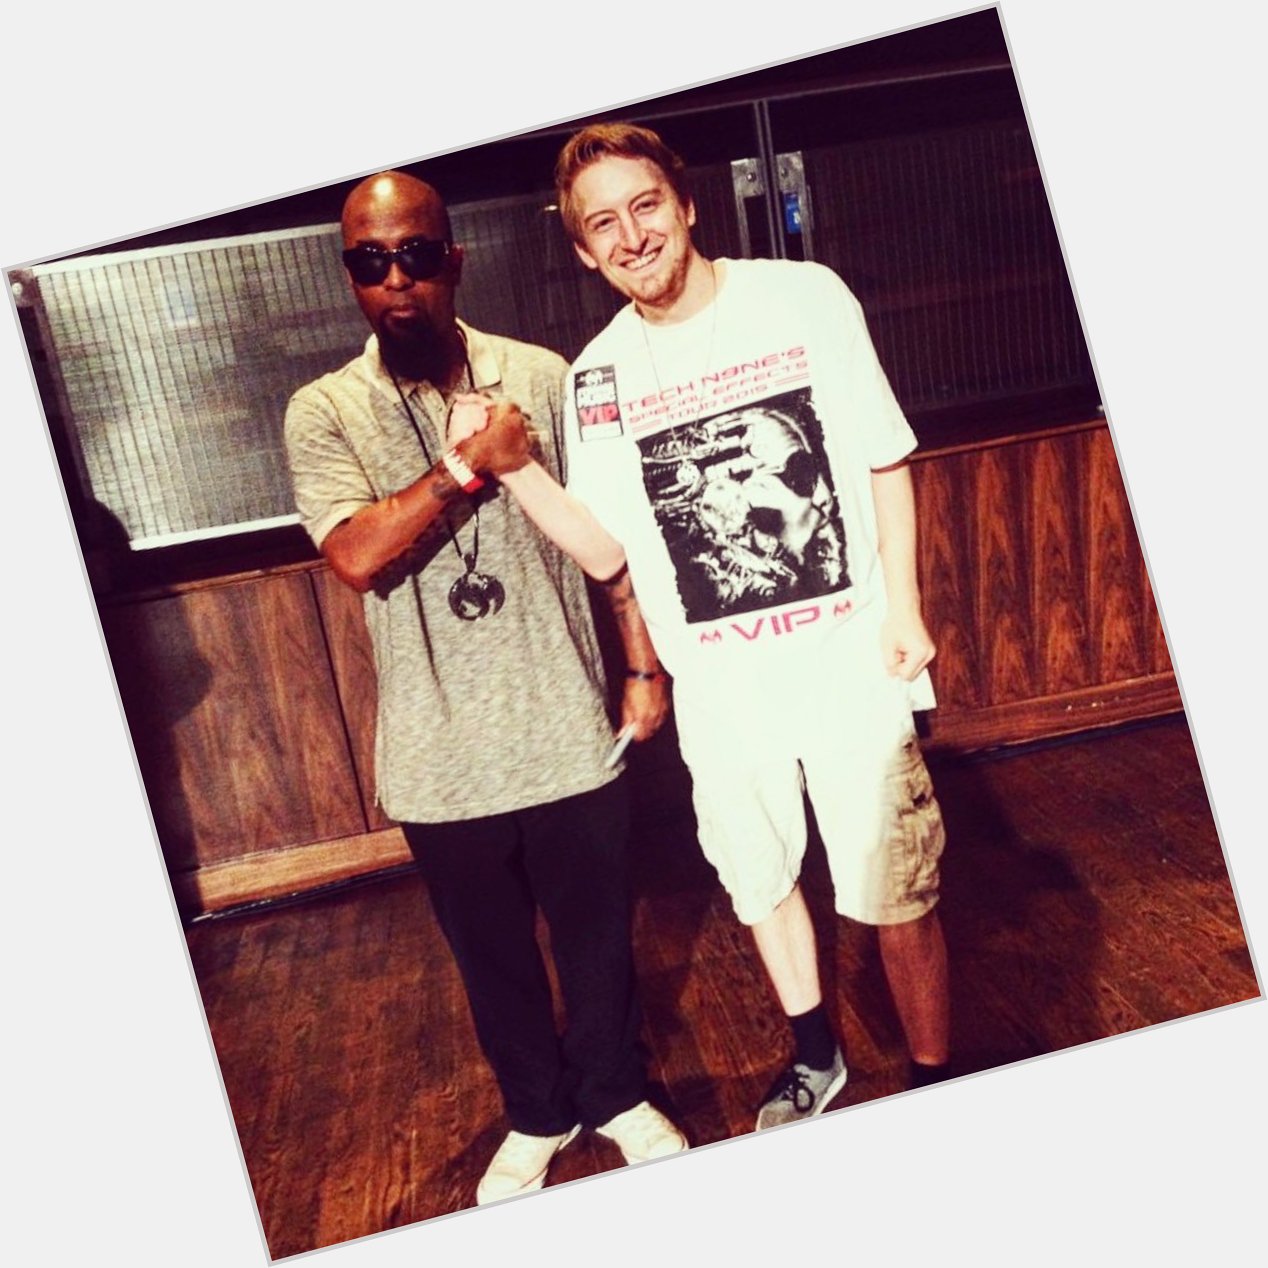 PatrickMartz_ : Happy birthday Tech N9ne! Thank you for your music that speaks to me & 